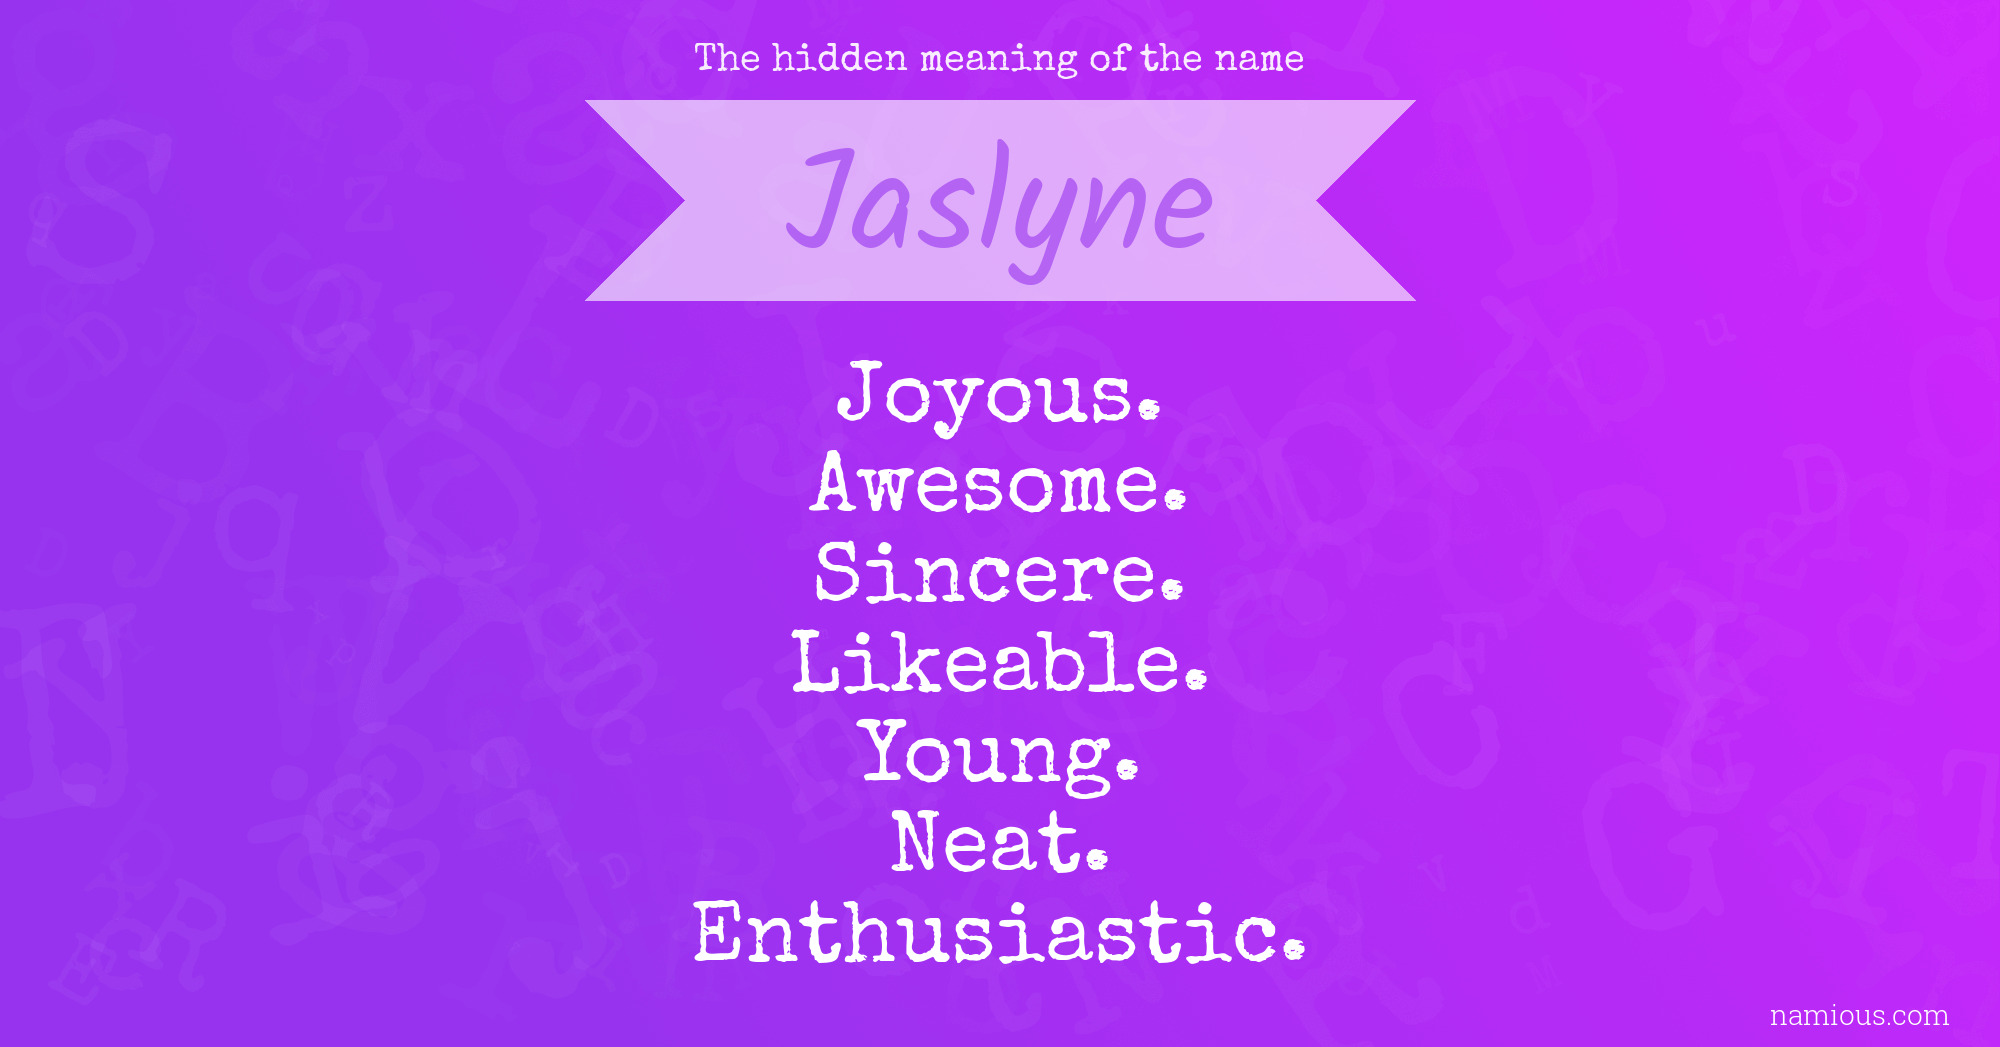 The hidden meaning of the name Jaslyne